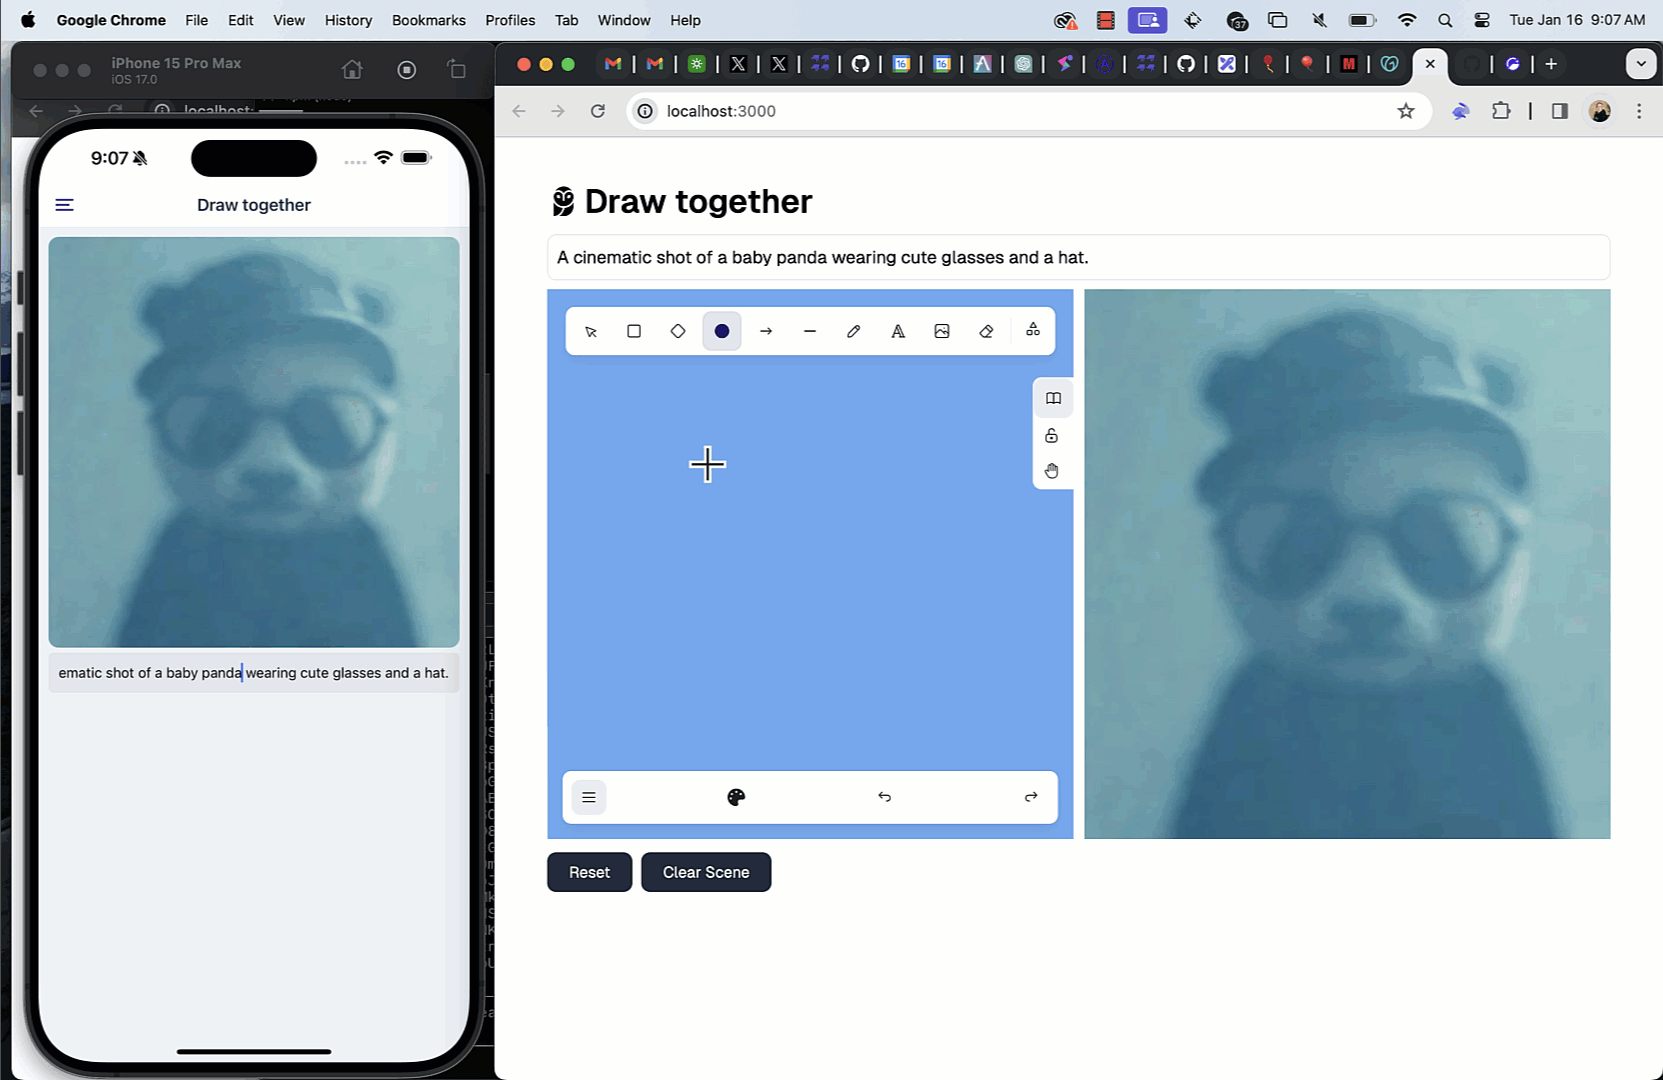 Draw together demo